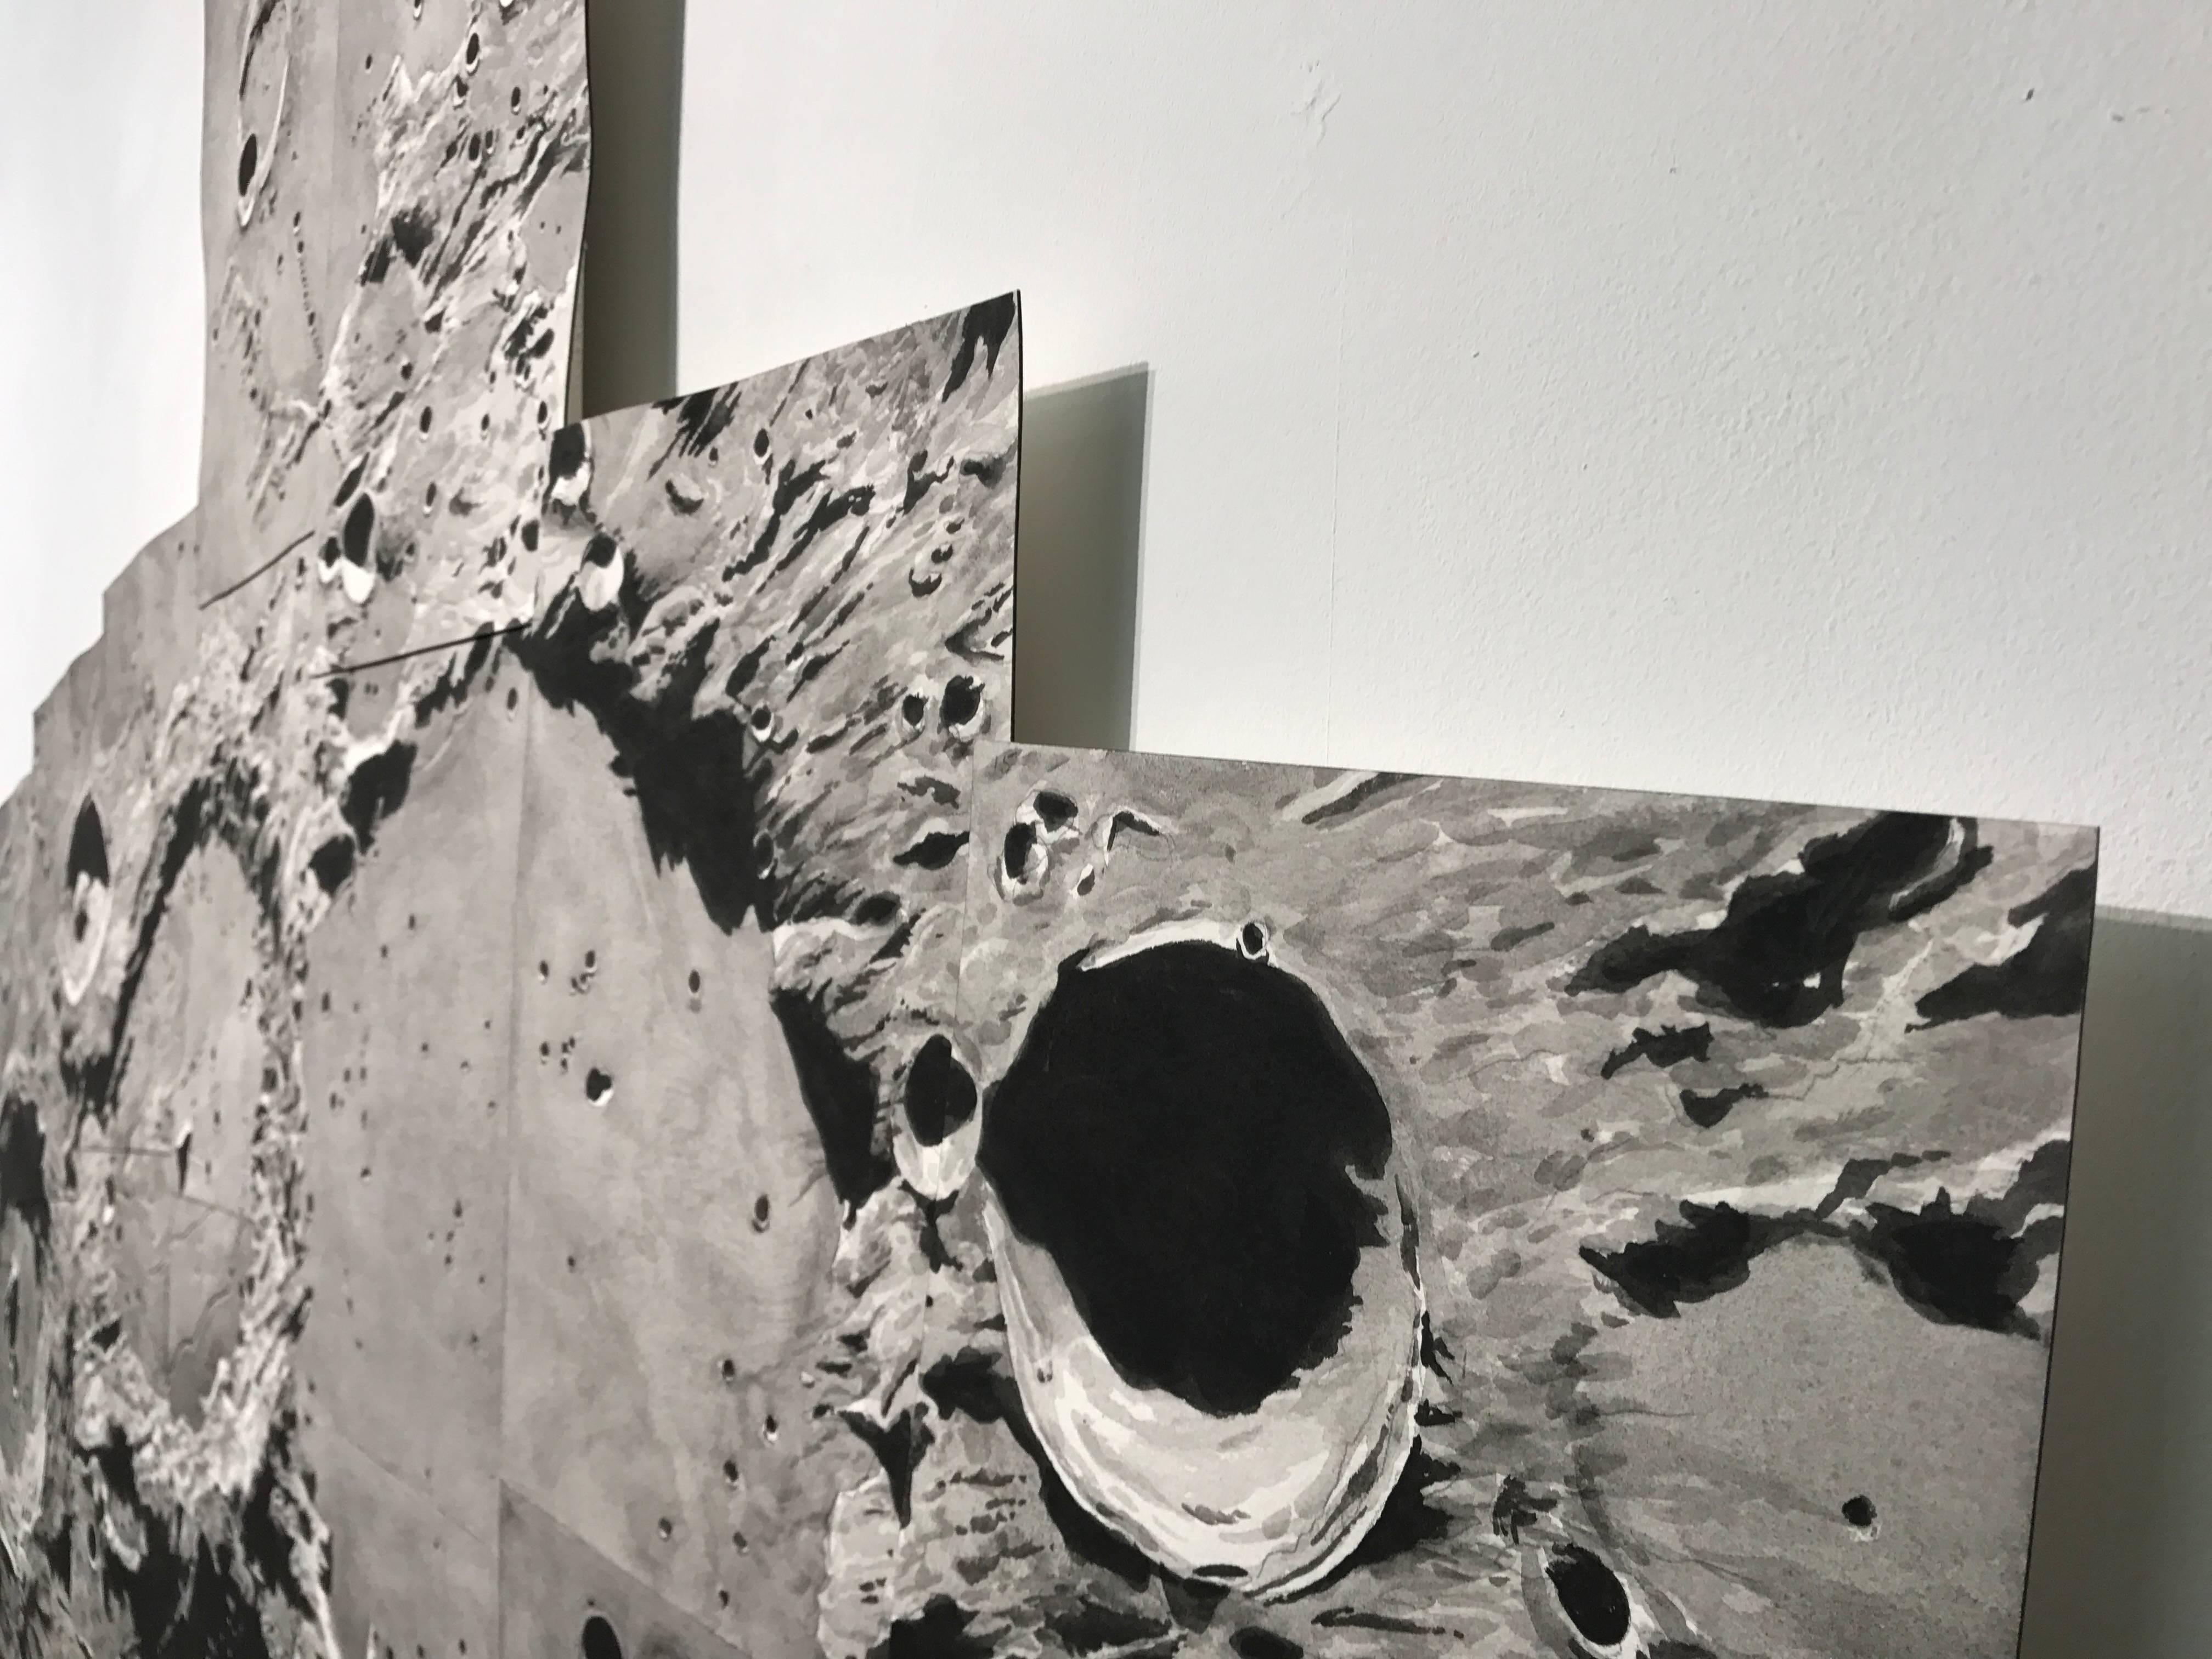 Lunar Crater Chain - Gray Landscape Painting by Thomas Broadbent